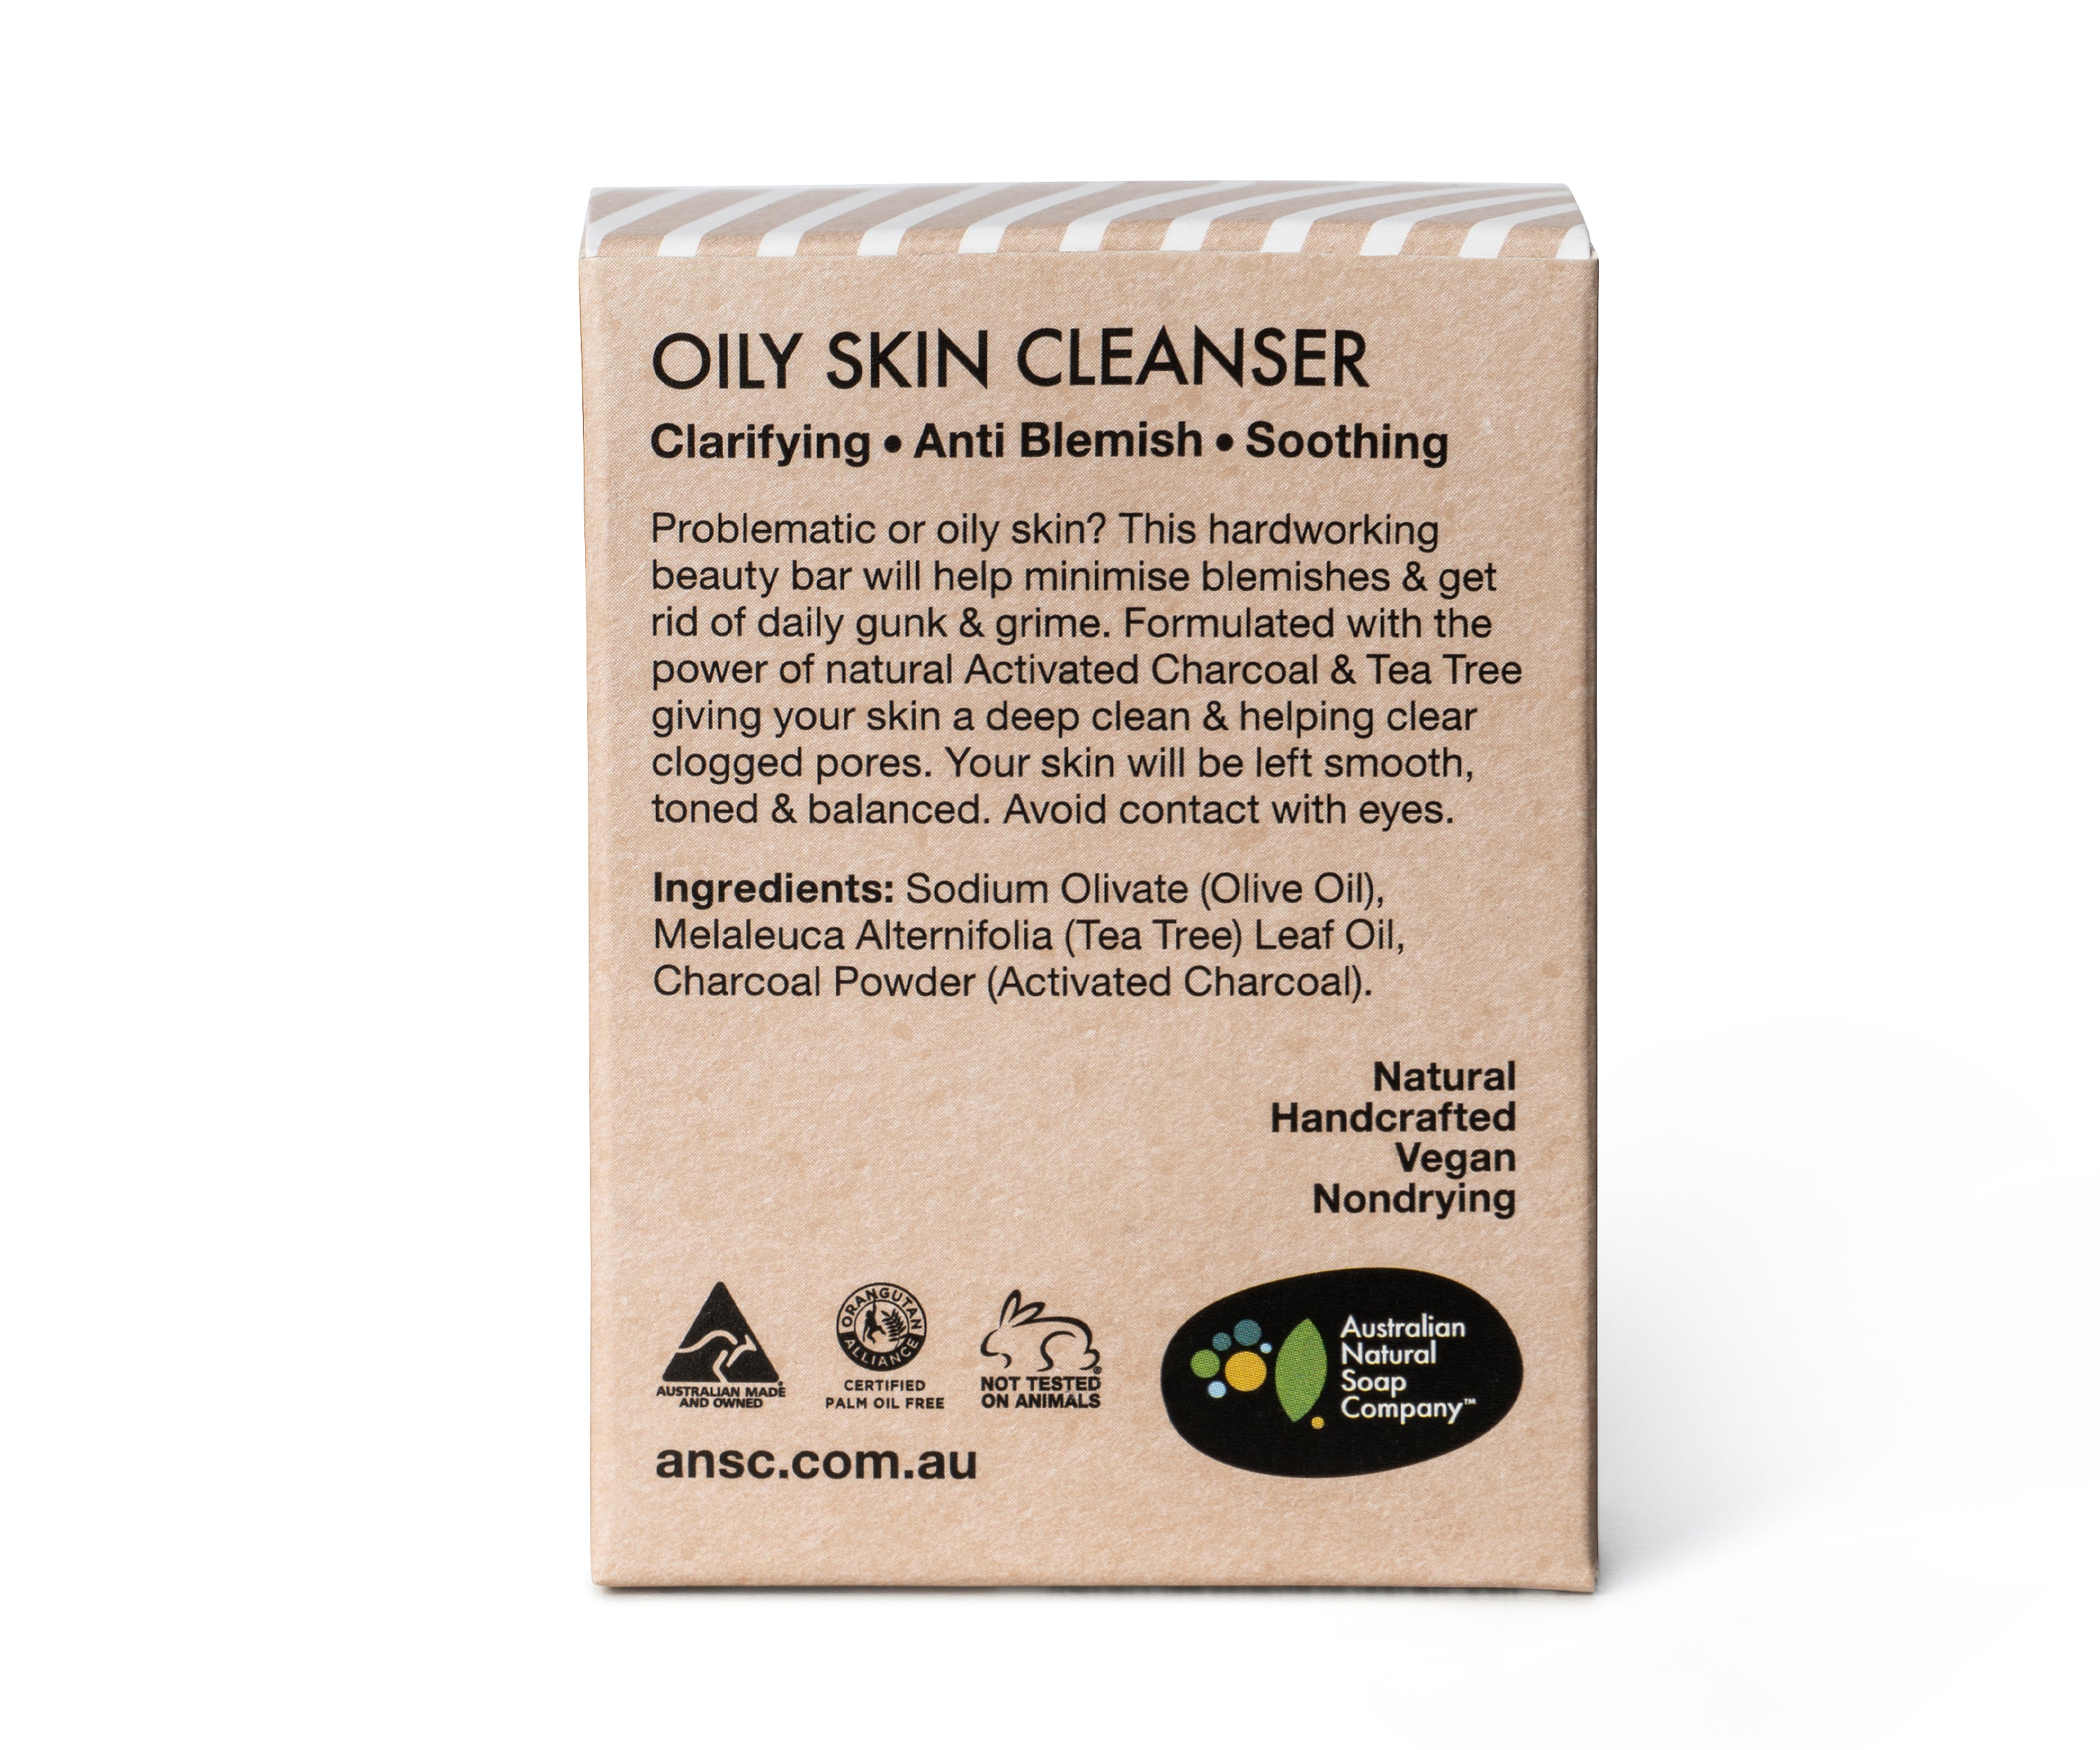 Oily Skin Facial Cleanser - Activated Charcoal & Tea Tree